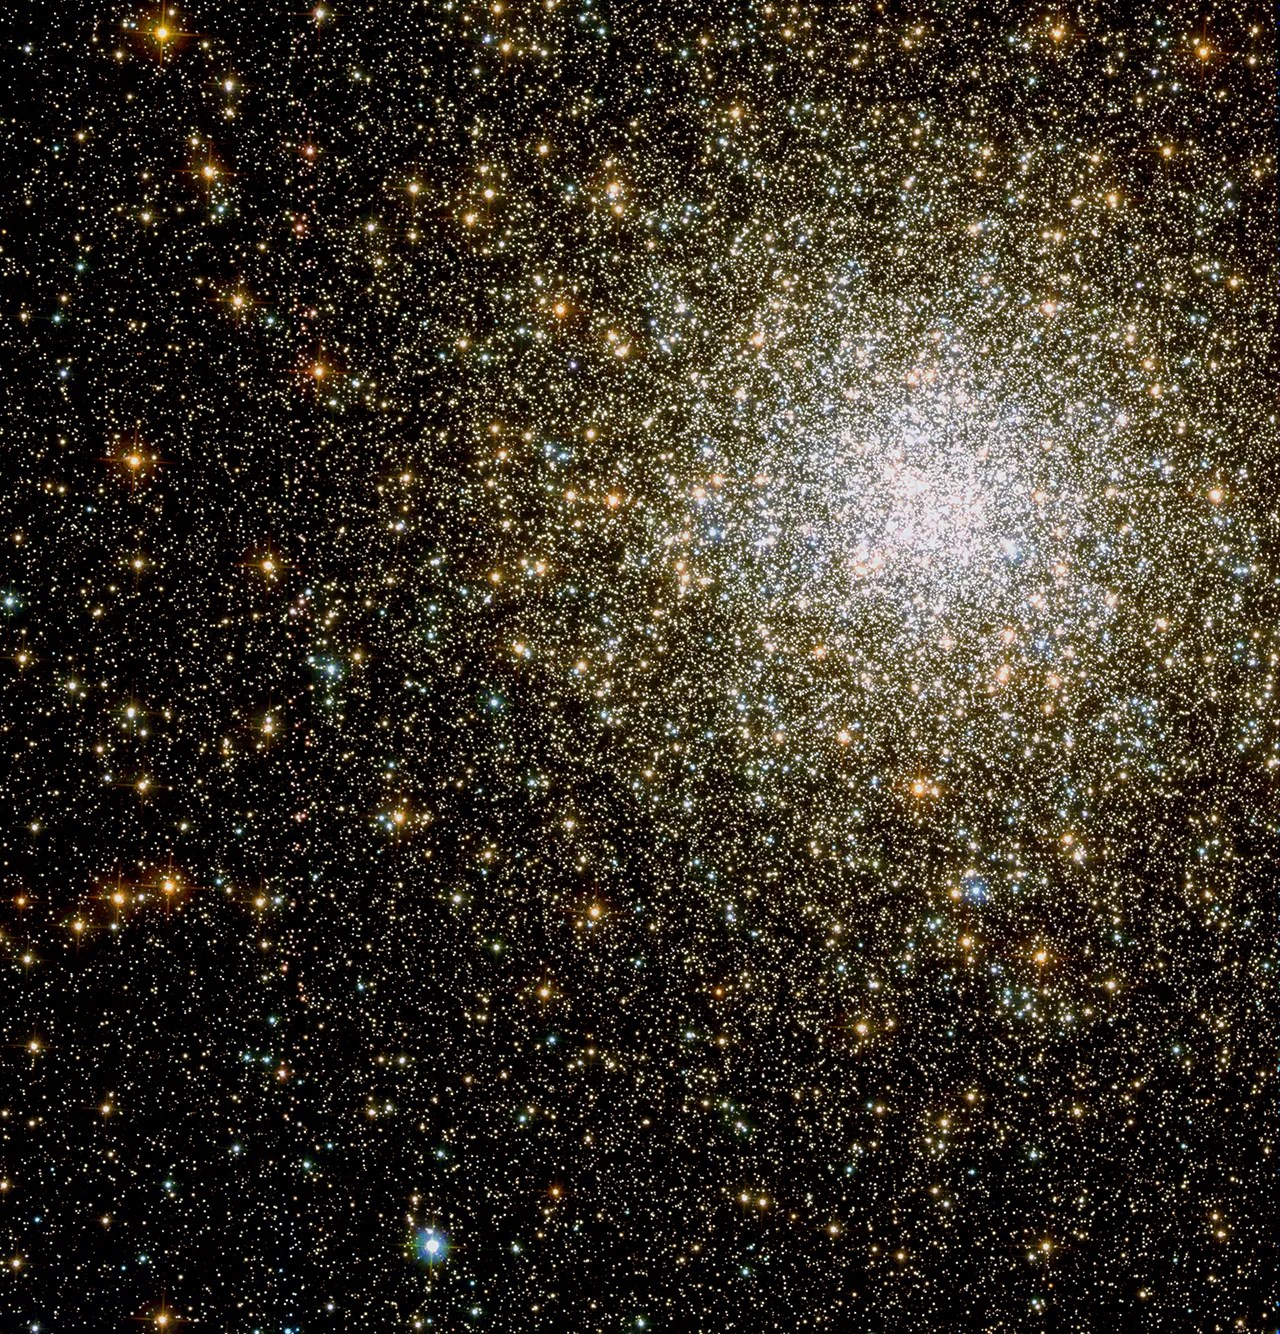 A sparkling cluster of yellow and white stars, primarily concentrated near the upper right.